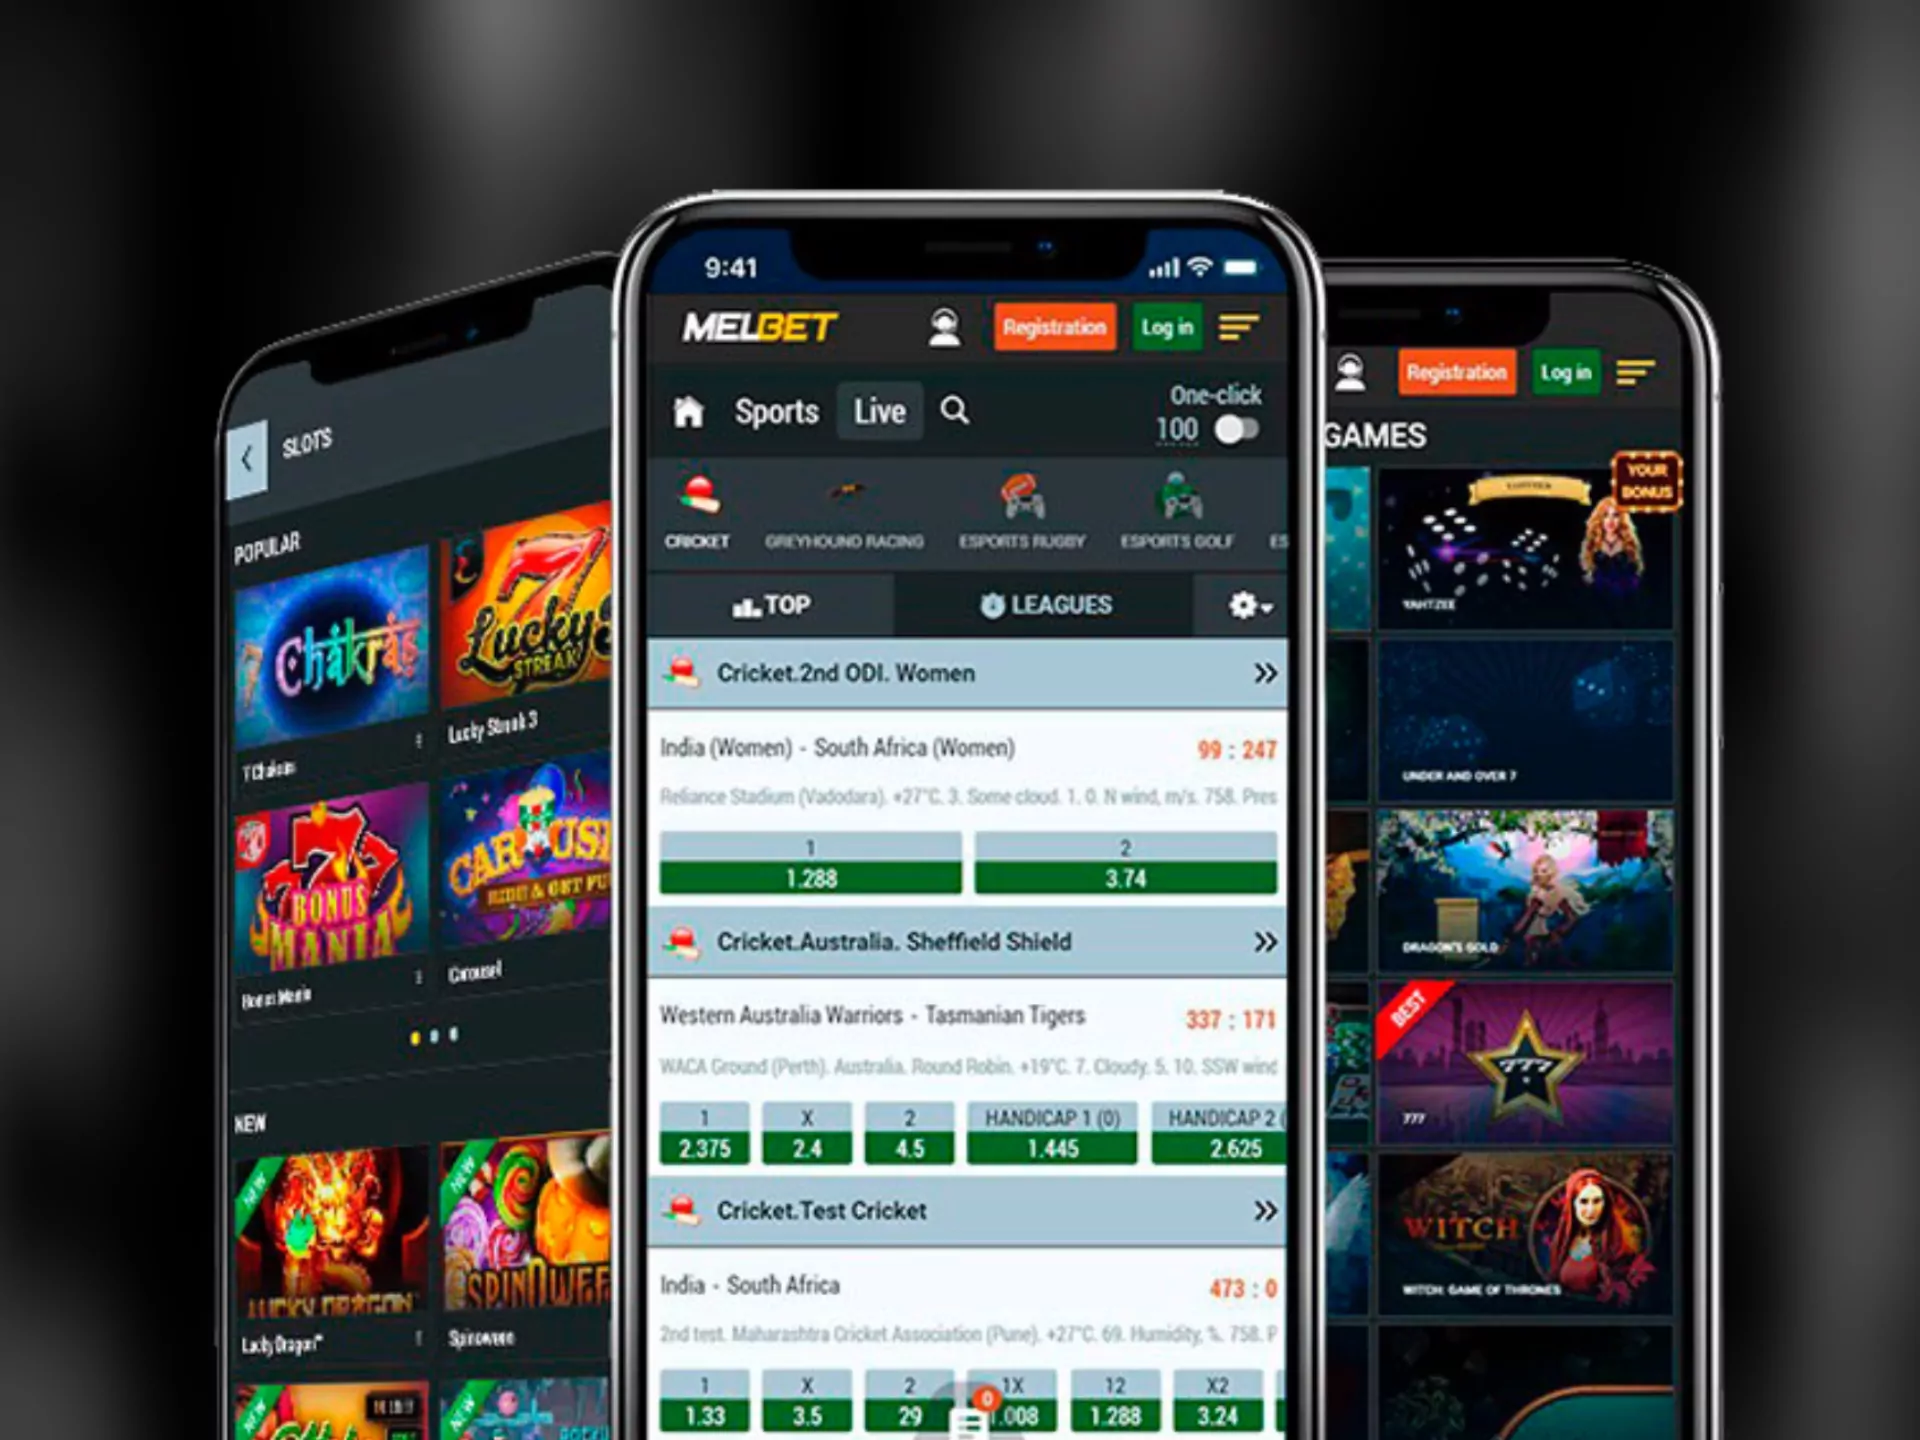 We think you'll find Melbet mobile app better way to gamble.